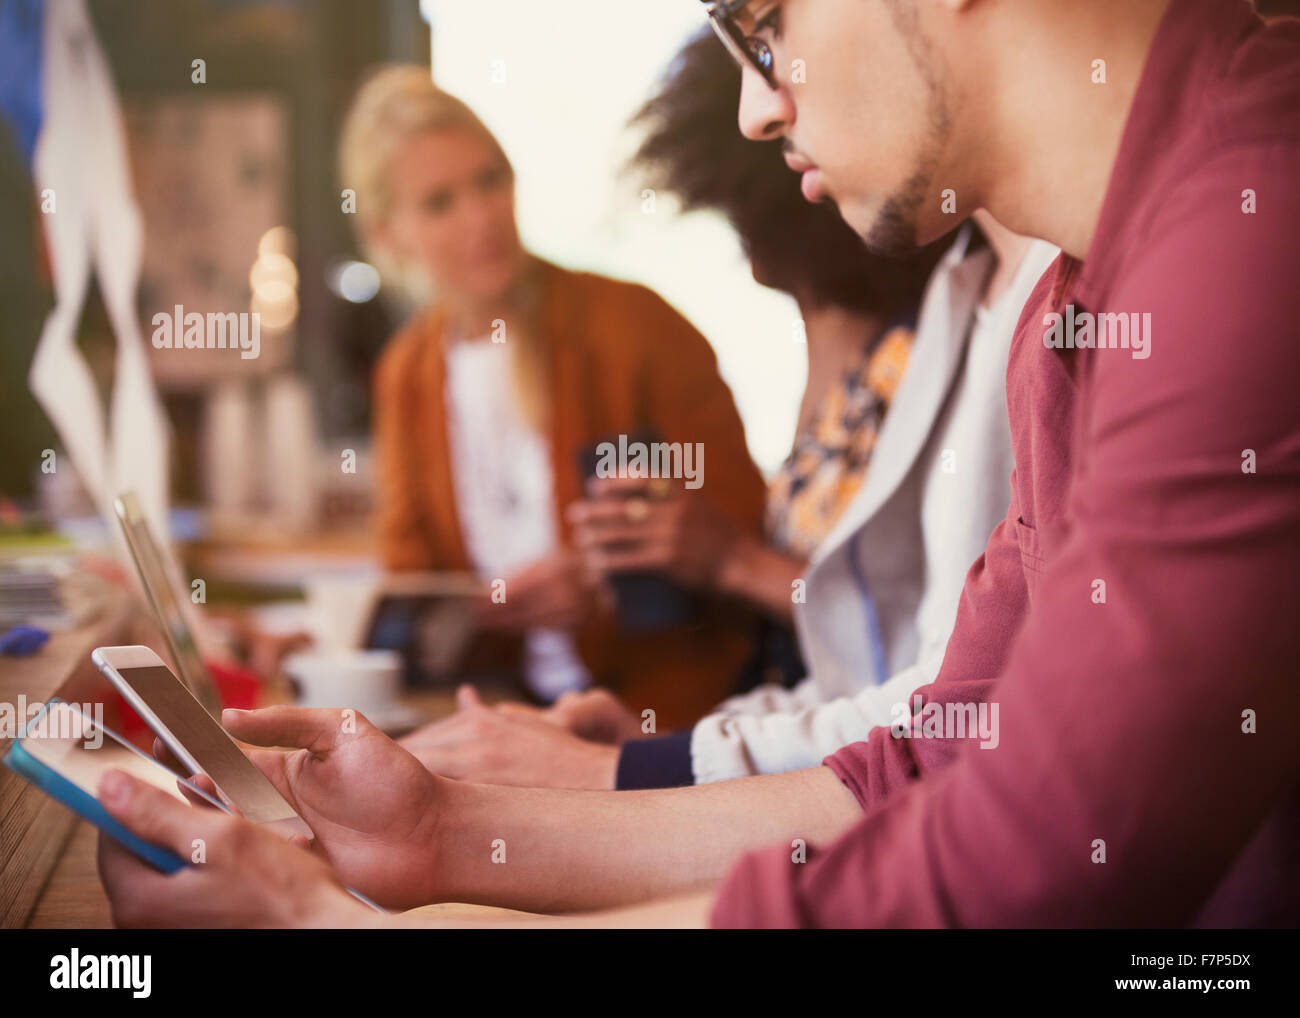 Man using digital tablet and cell phone in cafe Stock Photo